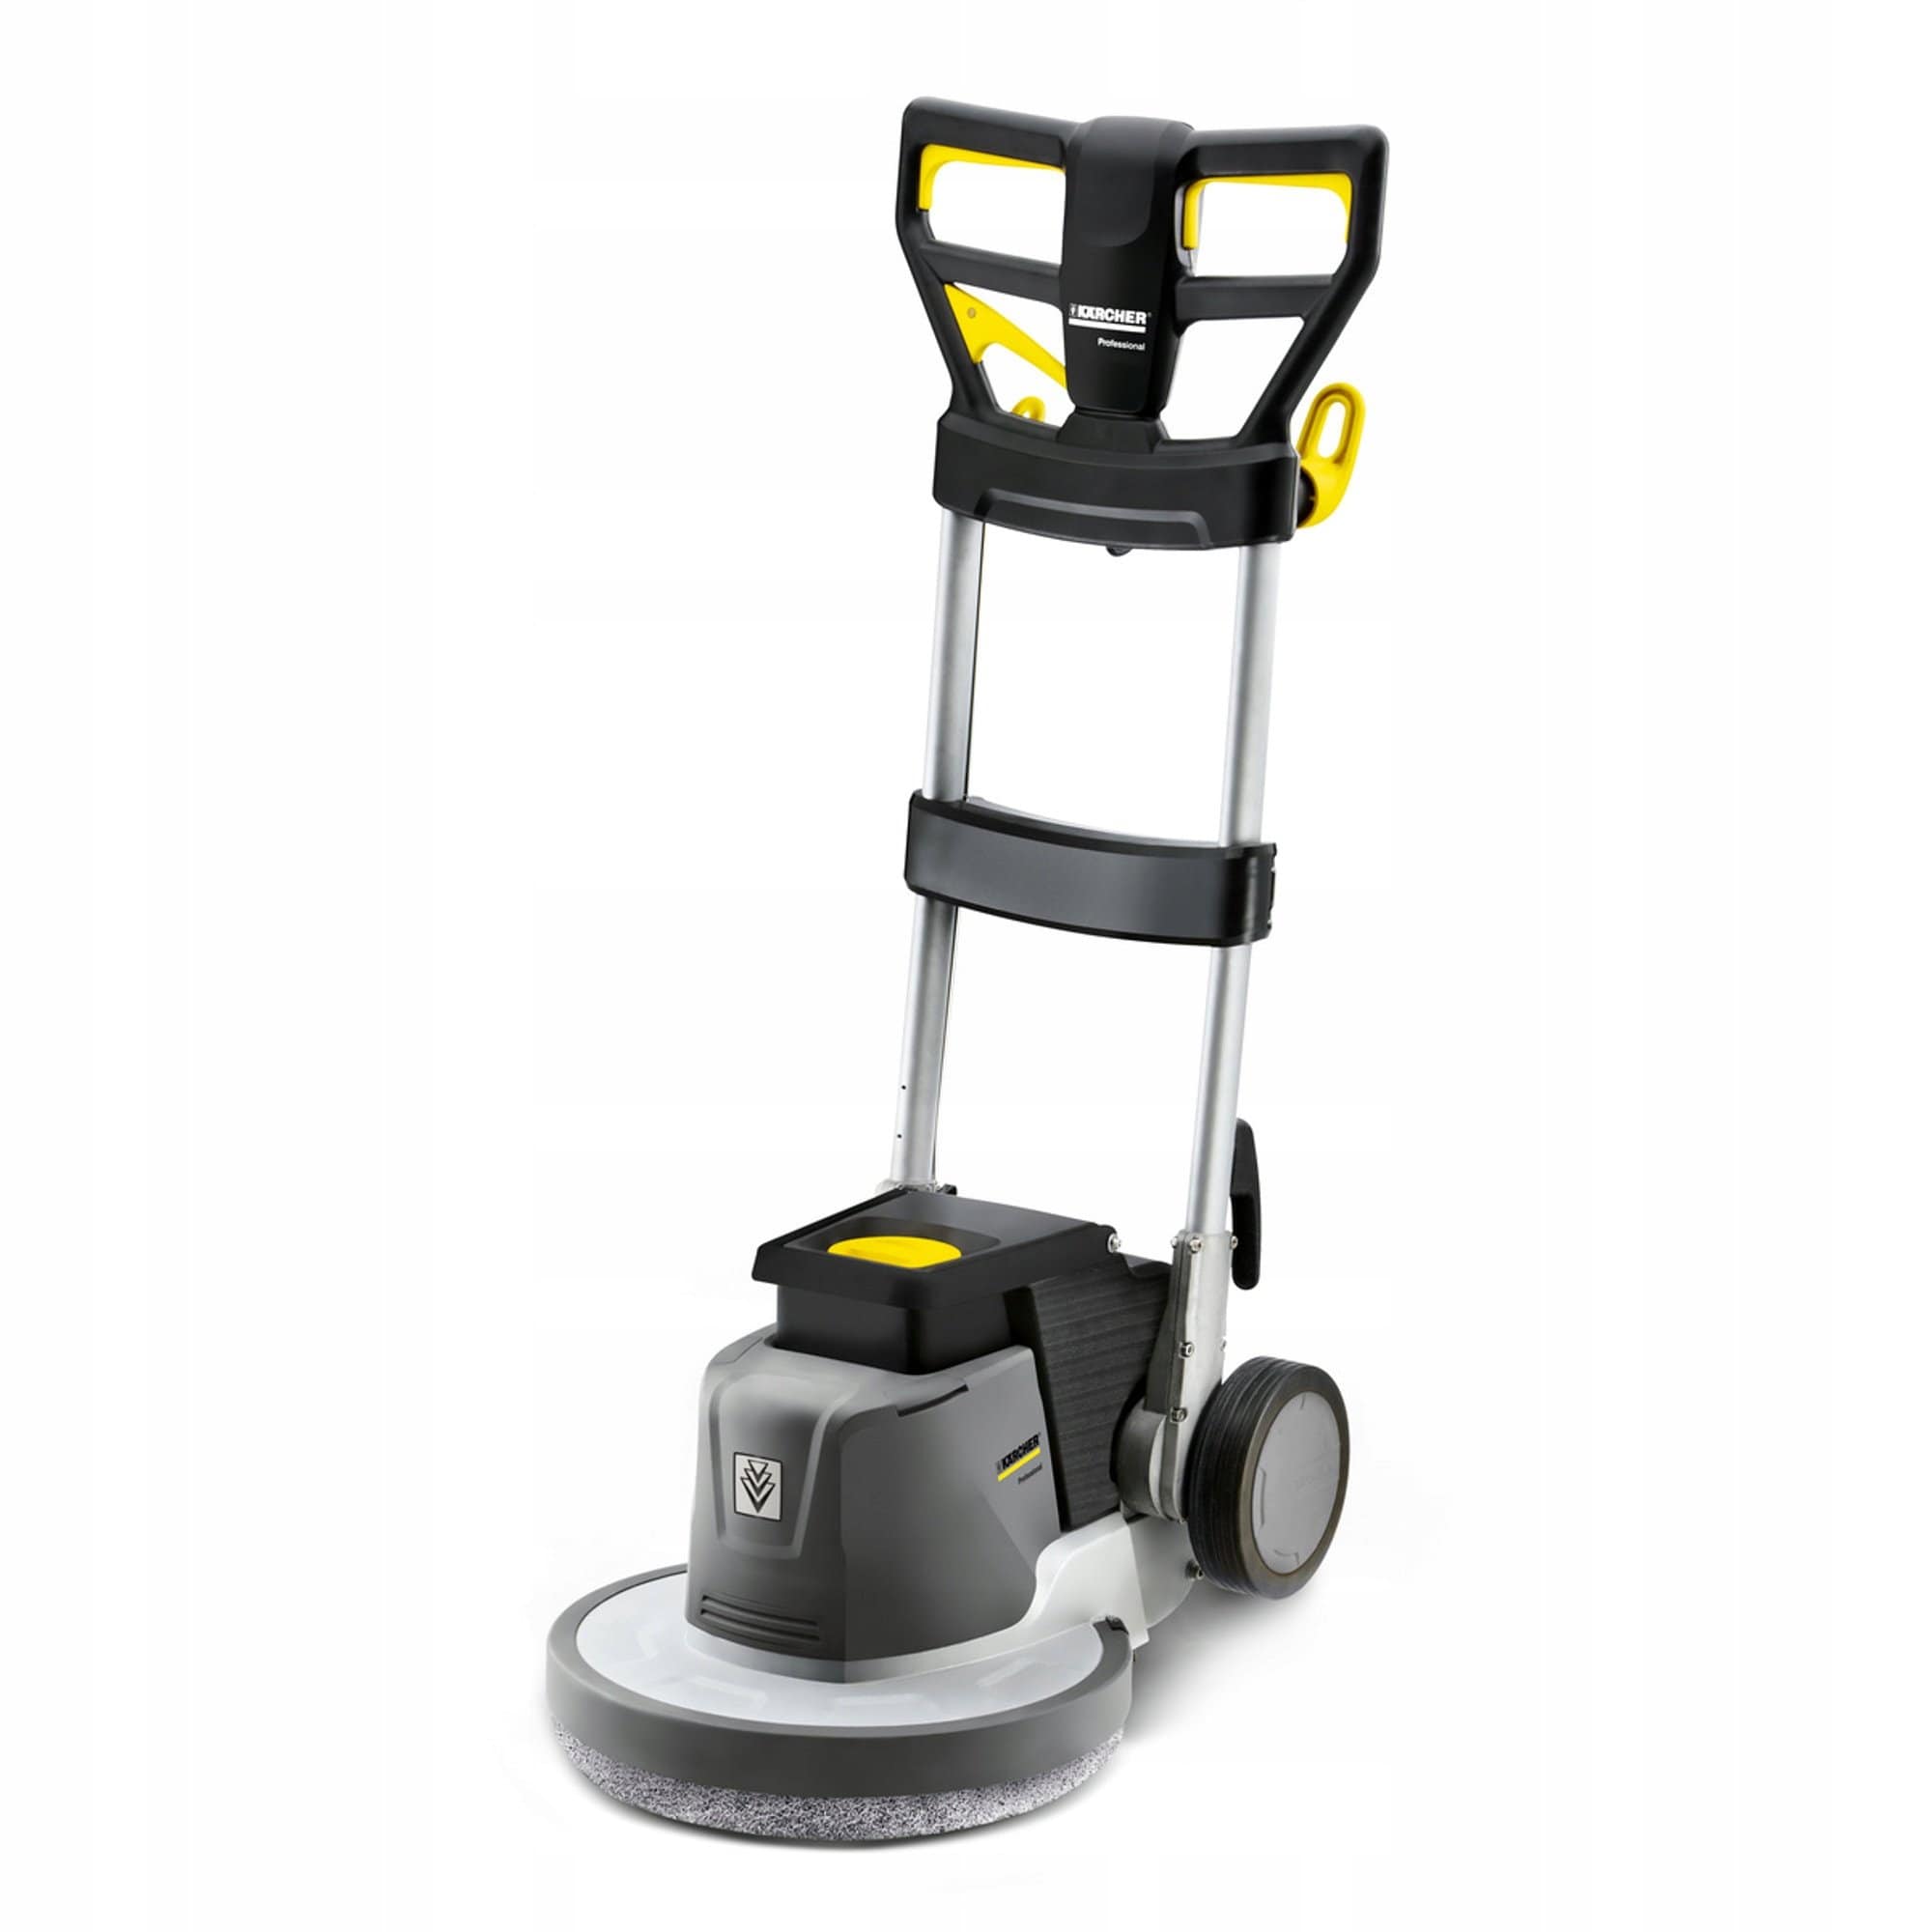 Karcher Stair Cleaning Machine - BD 17/5 C | Supply Master | Accra, Ghana Tools Building Steel Engineering Hardware tool